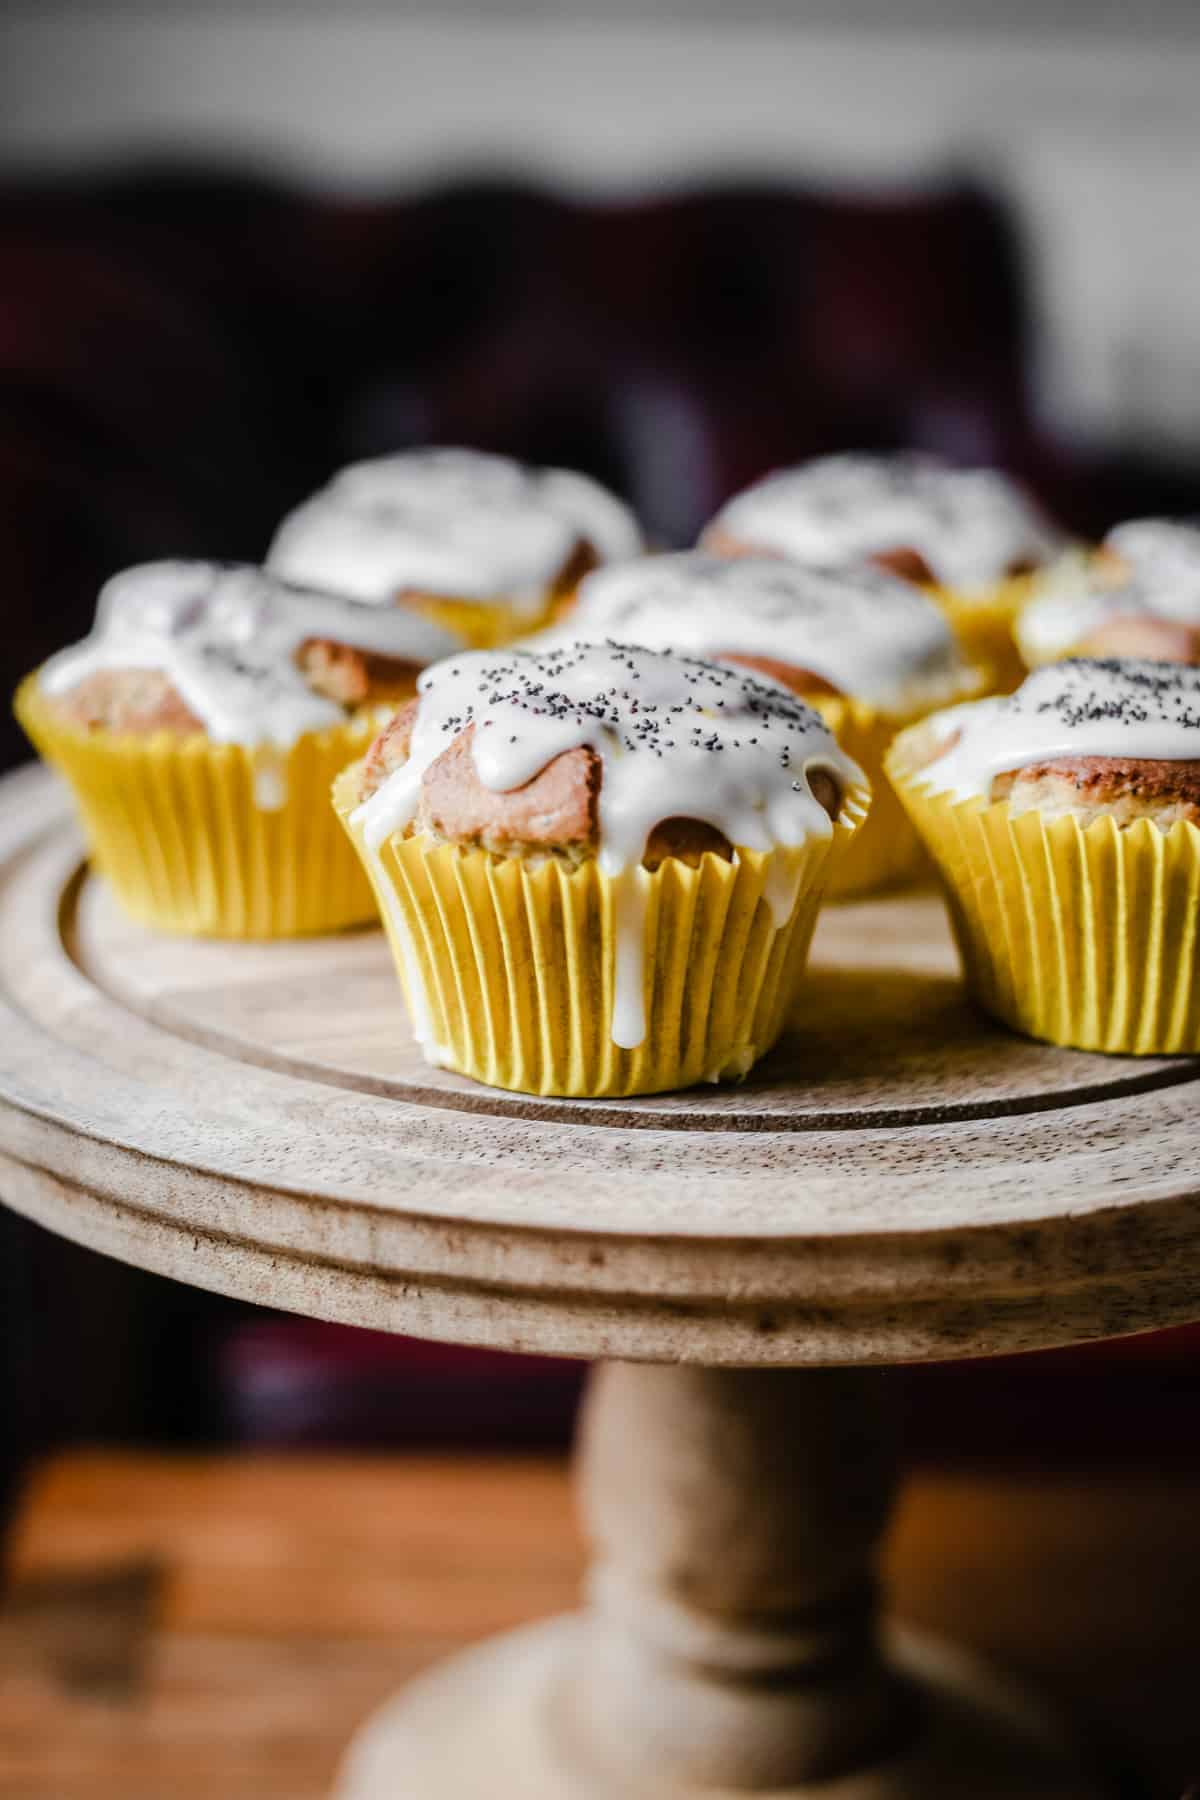 Lemon and Poppy Seed Muffins on a wooden cake stand